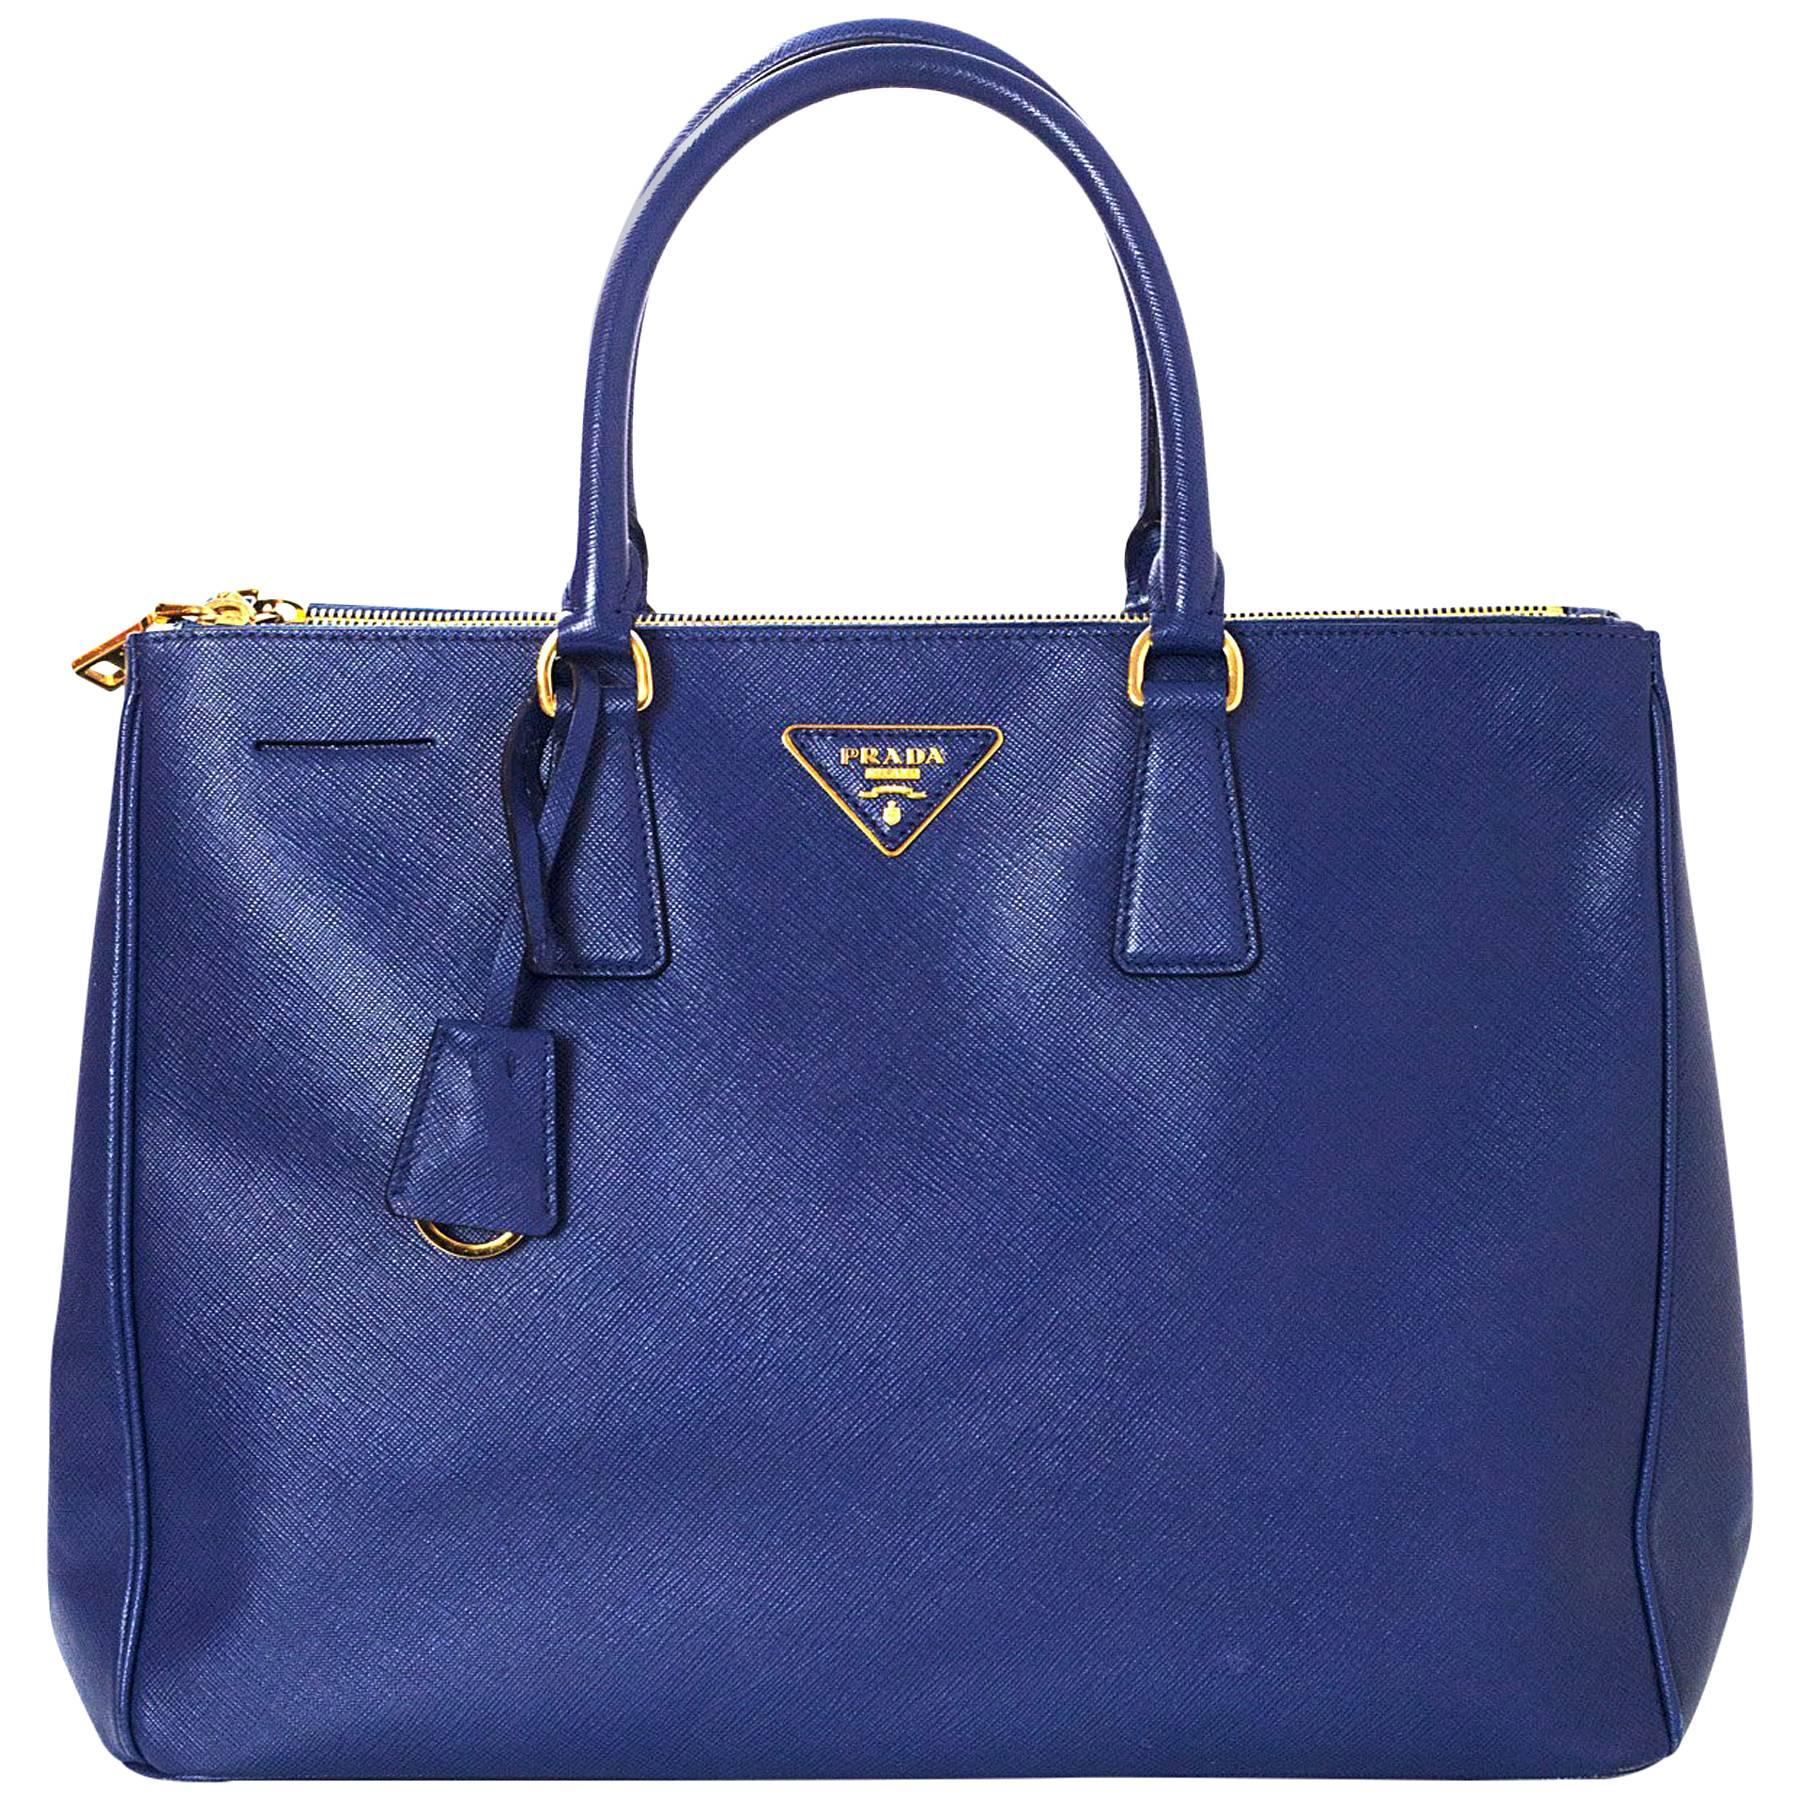 Prada Blue Saffiano Lux Double Zip Tote Bag with GHW